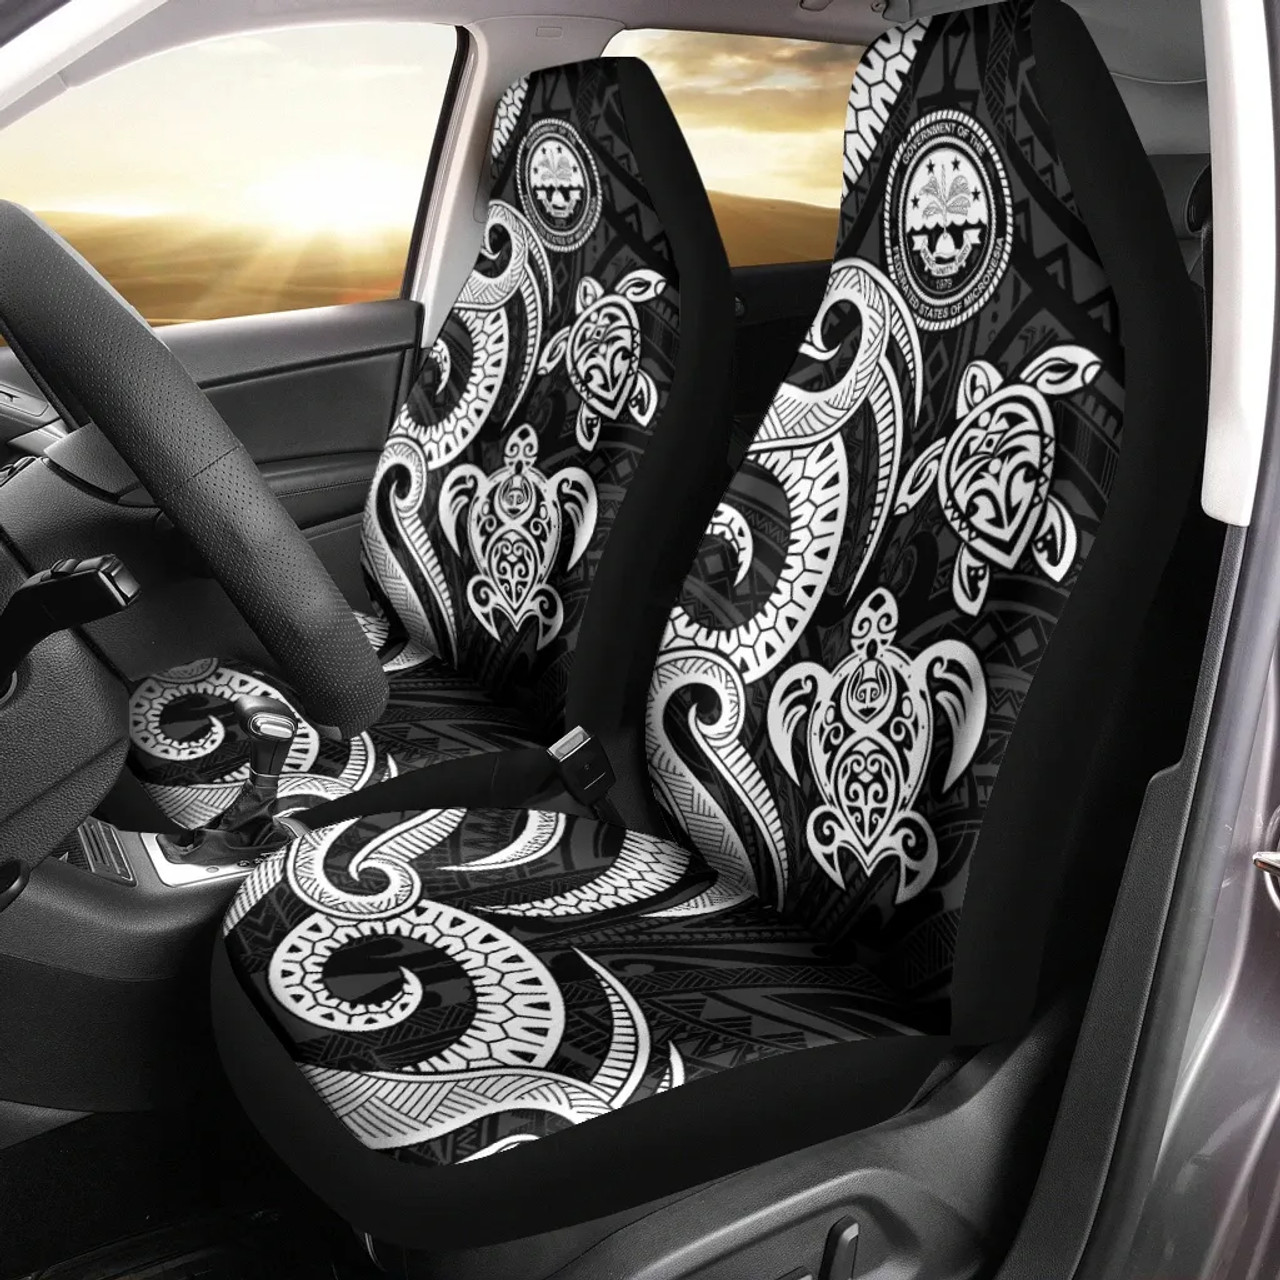 Federated States of Micronesia Car Seat Covers - White Tentacle Turtle